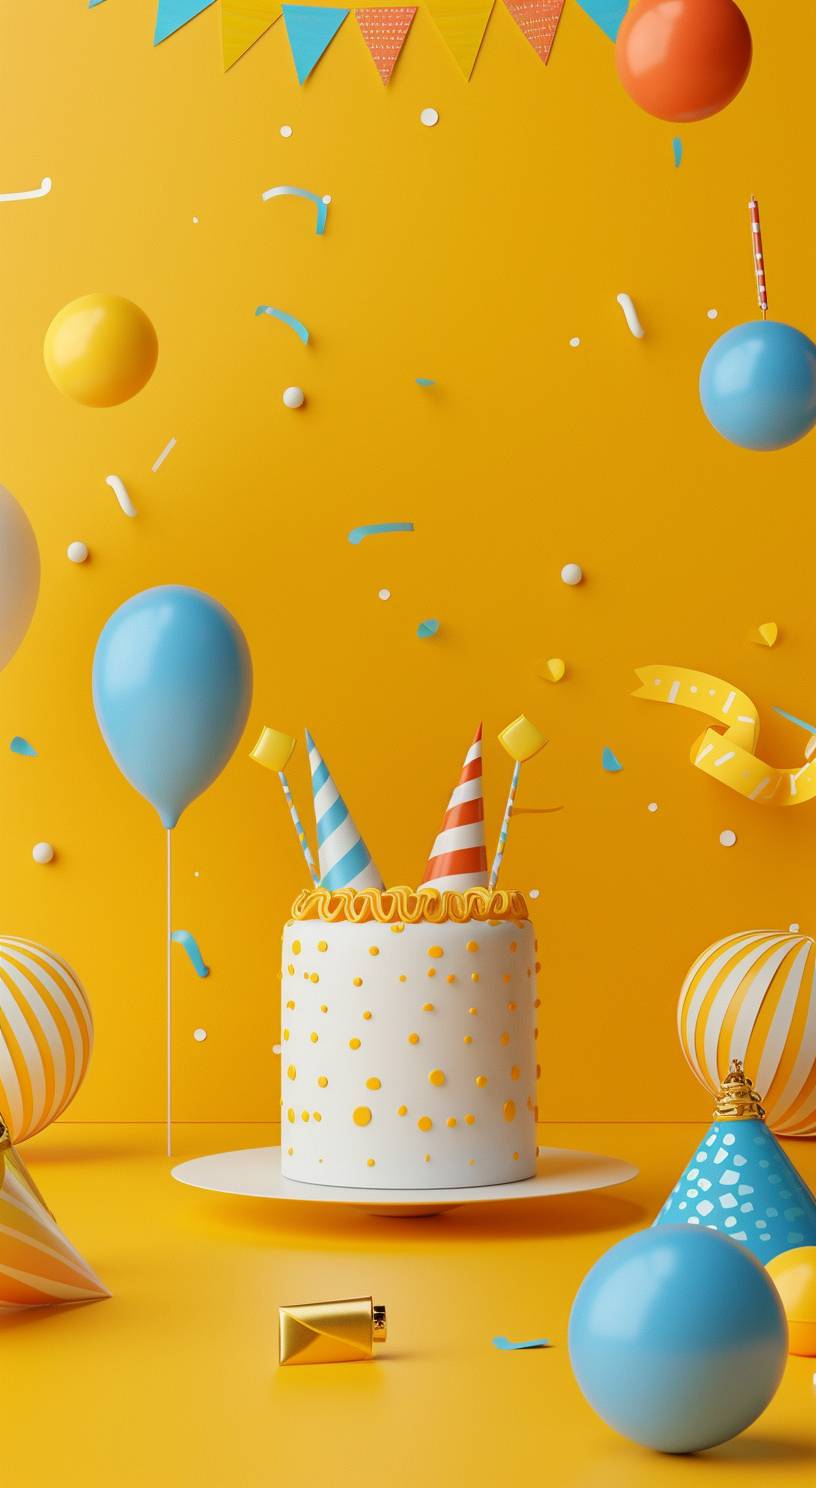 3D graphic design, simple birthday elements, colorful background, bright yellow